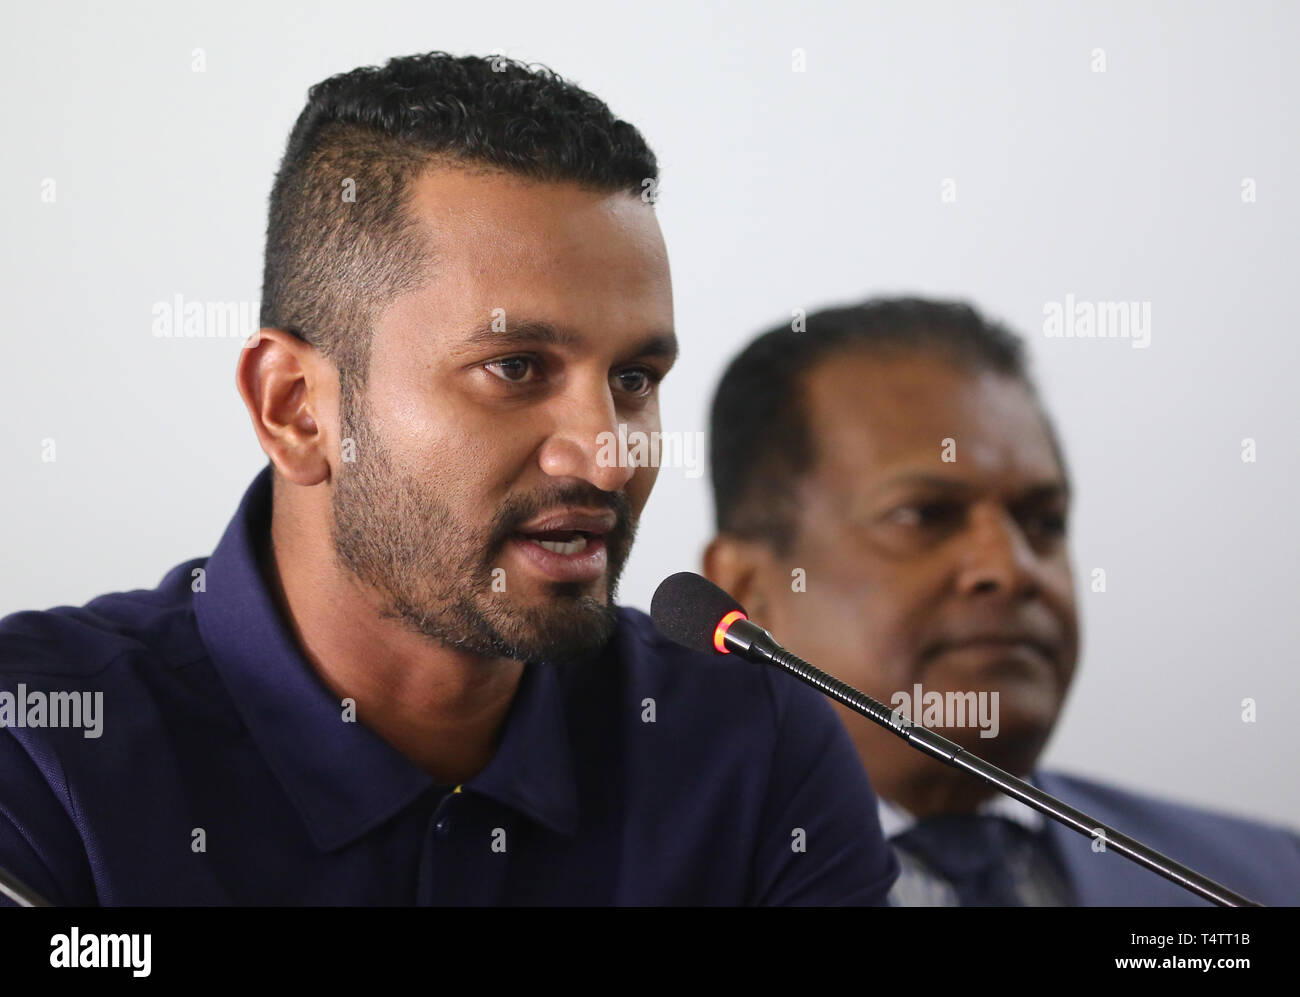 Colombo, Sri Lanka. 18th Apr, 2019. Sri Lanka's newly appointed captain for the ICC cricket World Cup, Dimuth Krunaratne speaks at a press conference in Colombo, Sri Lanka, Thursday, 18 April, 2019. Sri Lanka on April 18 dumped established stars including former captain Dinesh Chandimal from their one-day team in a mass clearout for the World Cup. Credit: Pradeep Dambarage/Pacific Press/Alamy Live News Stock Photo